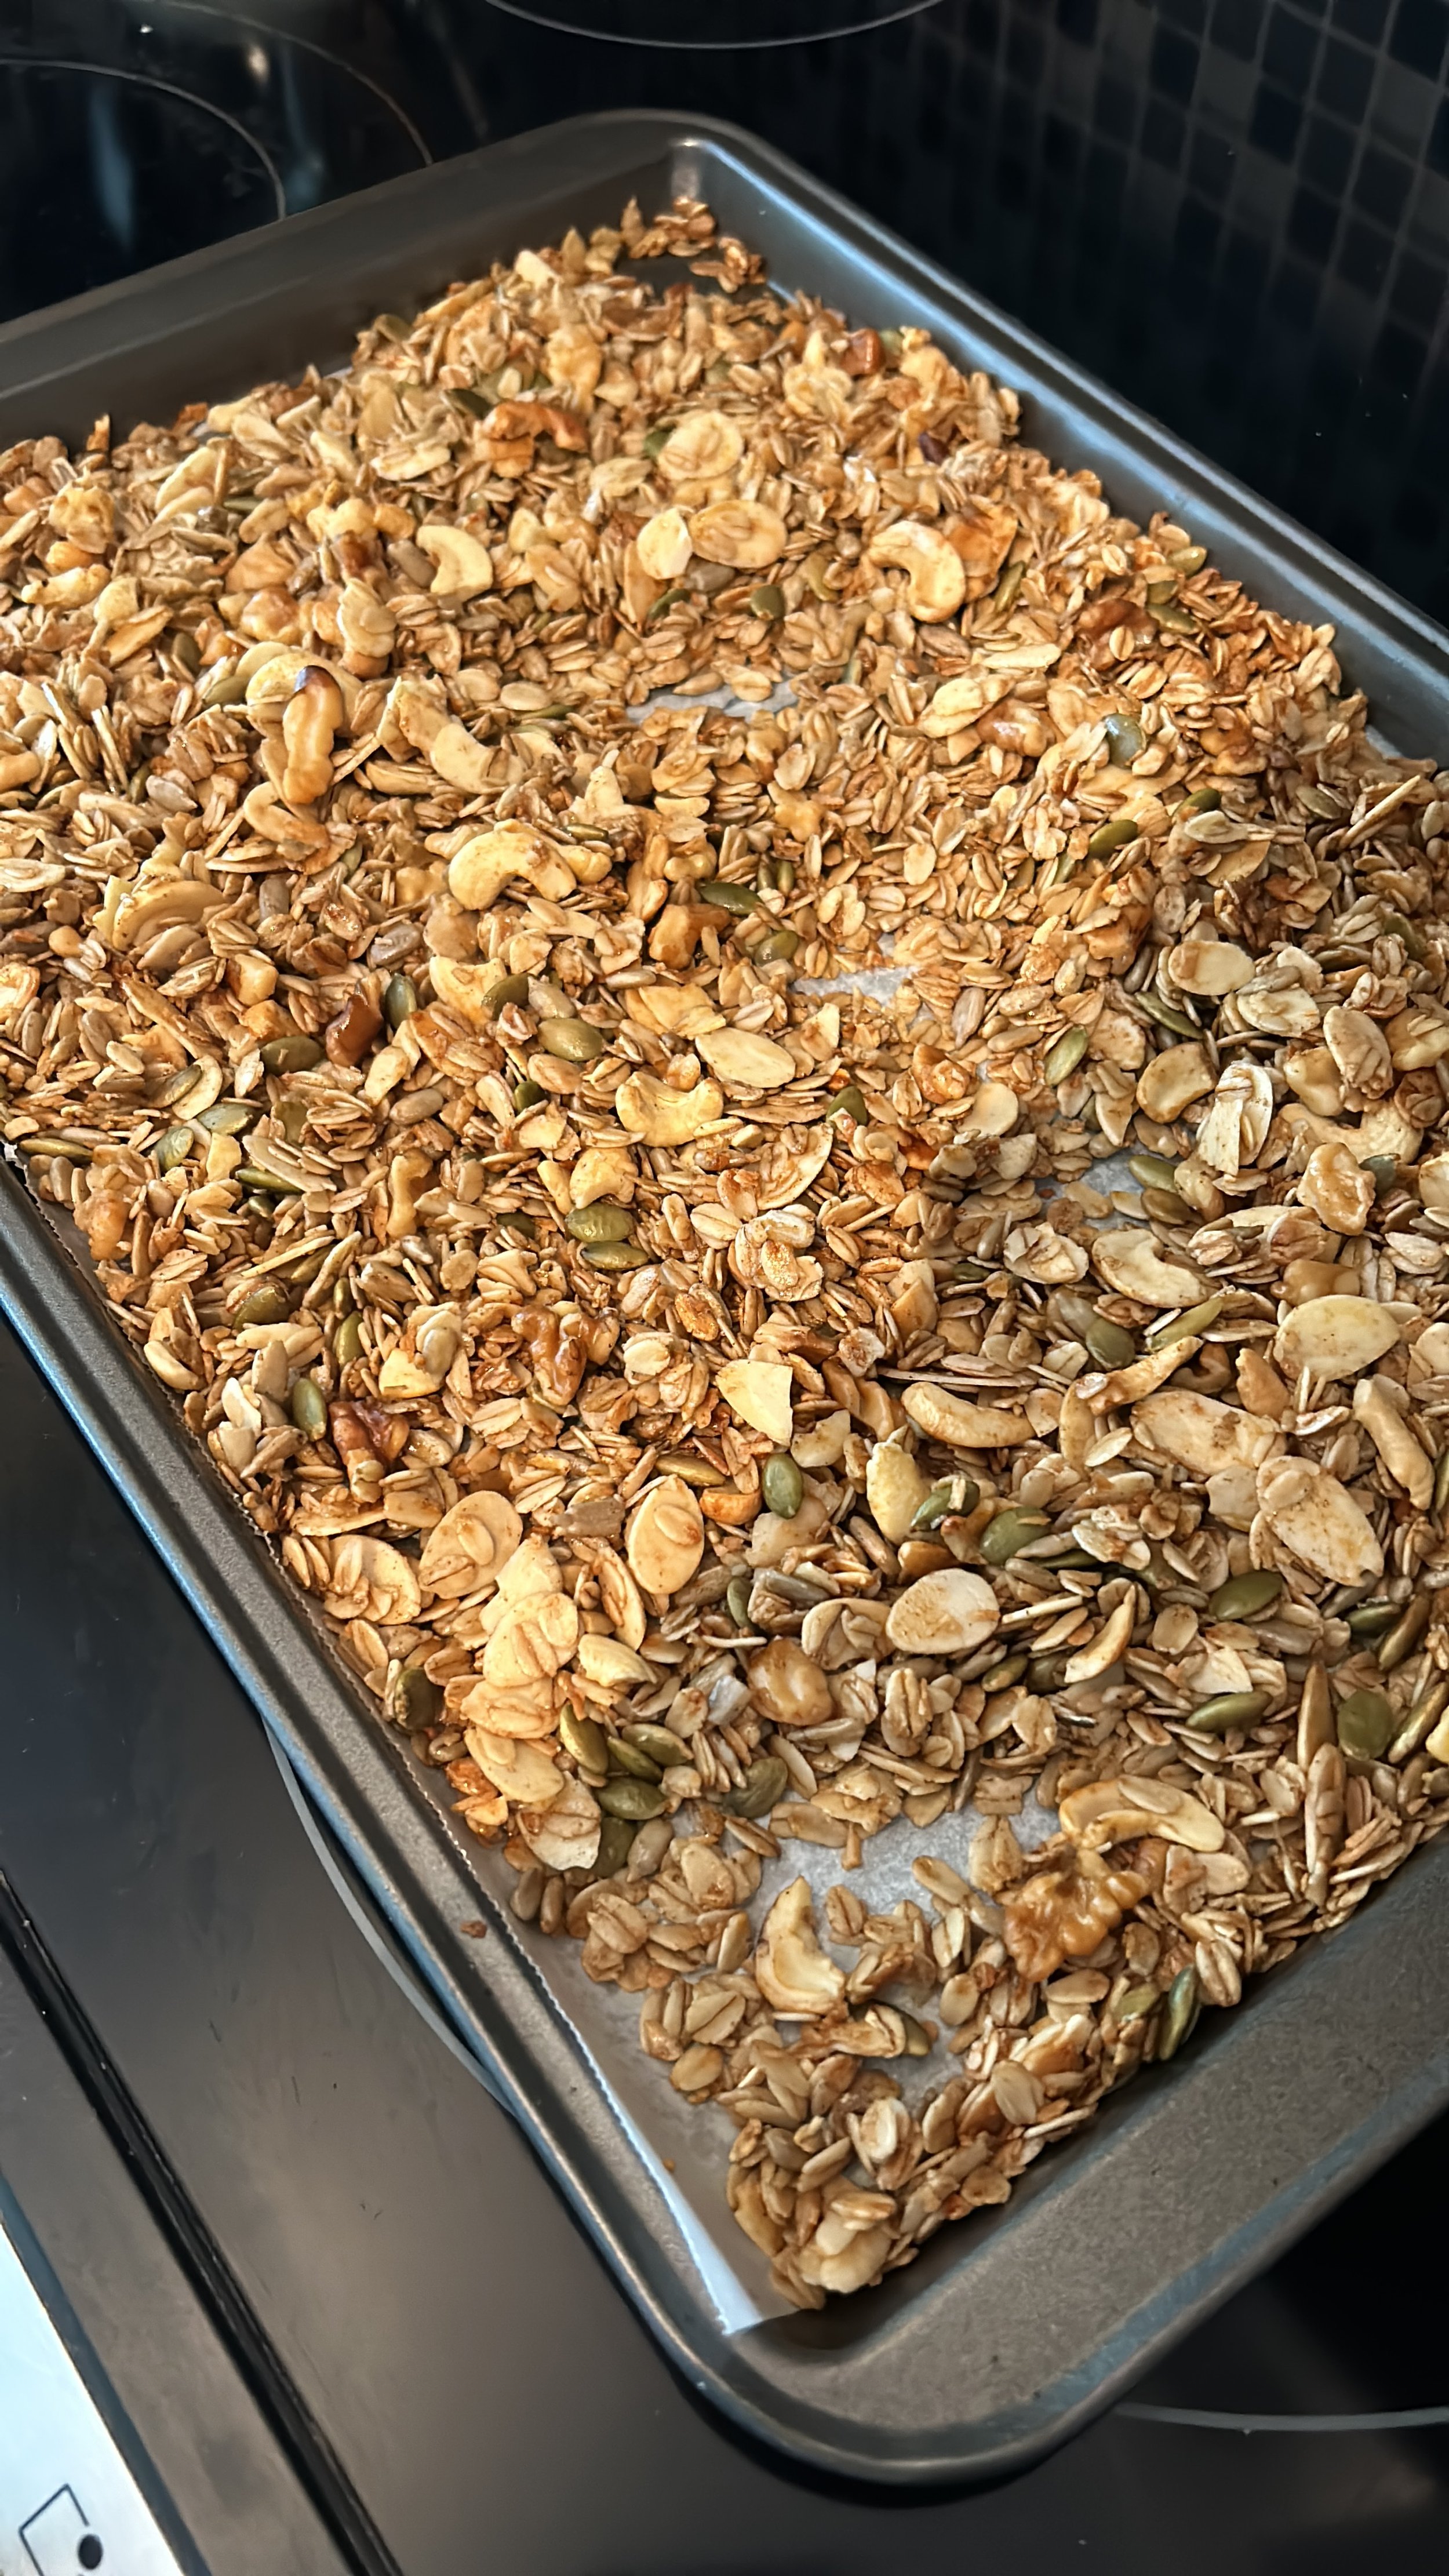 Toasted granola mixture cooling down